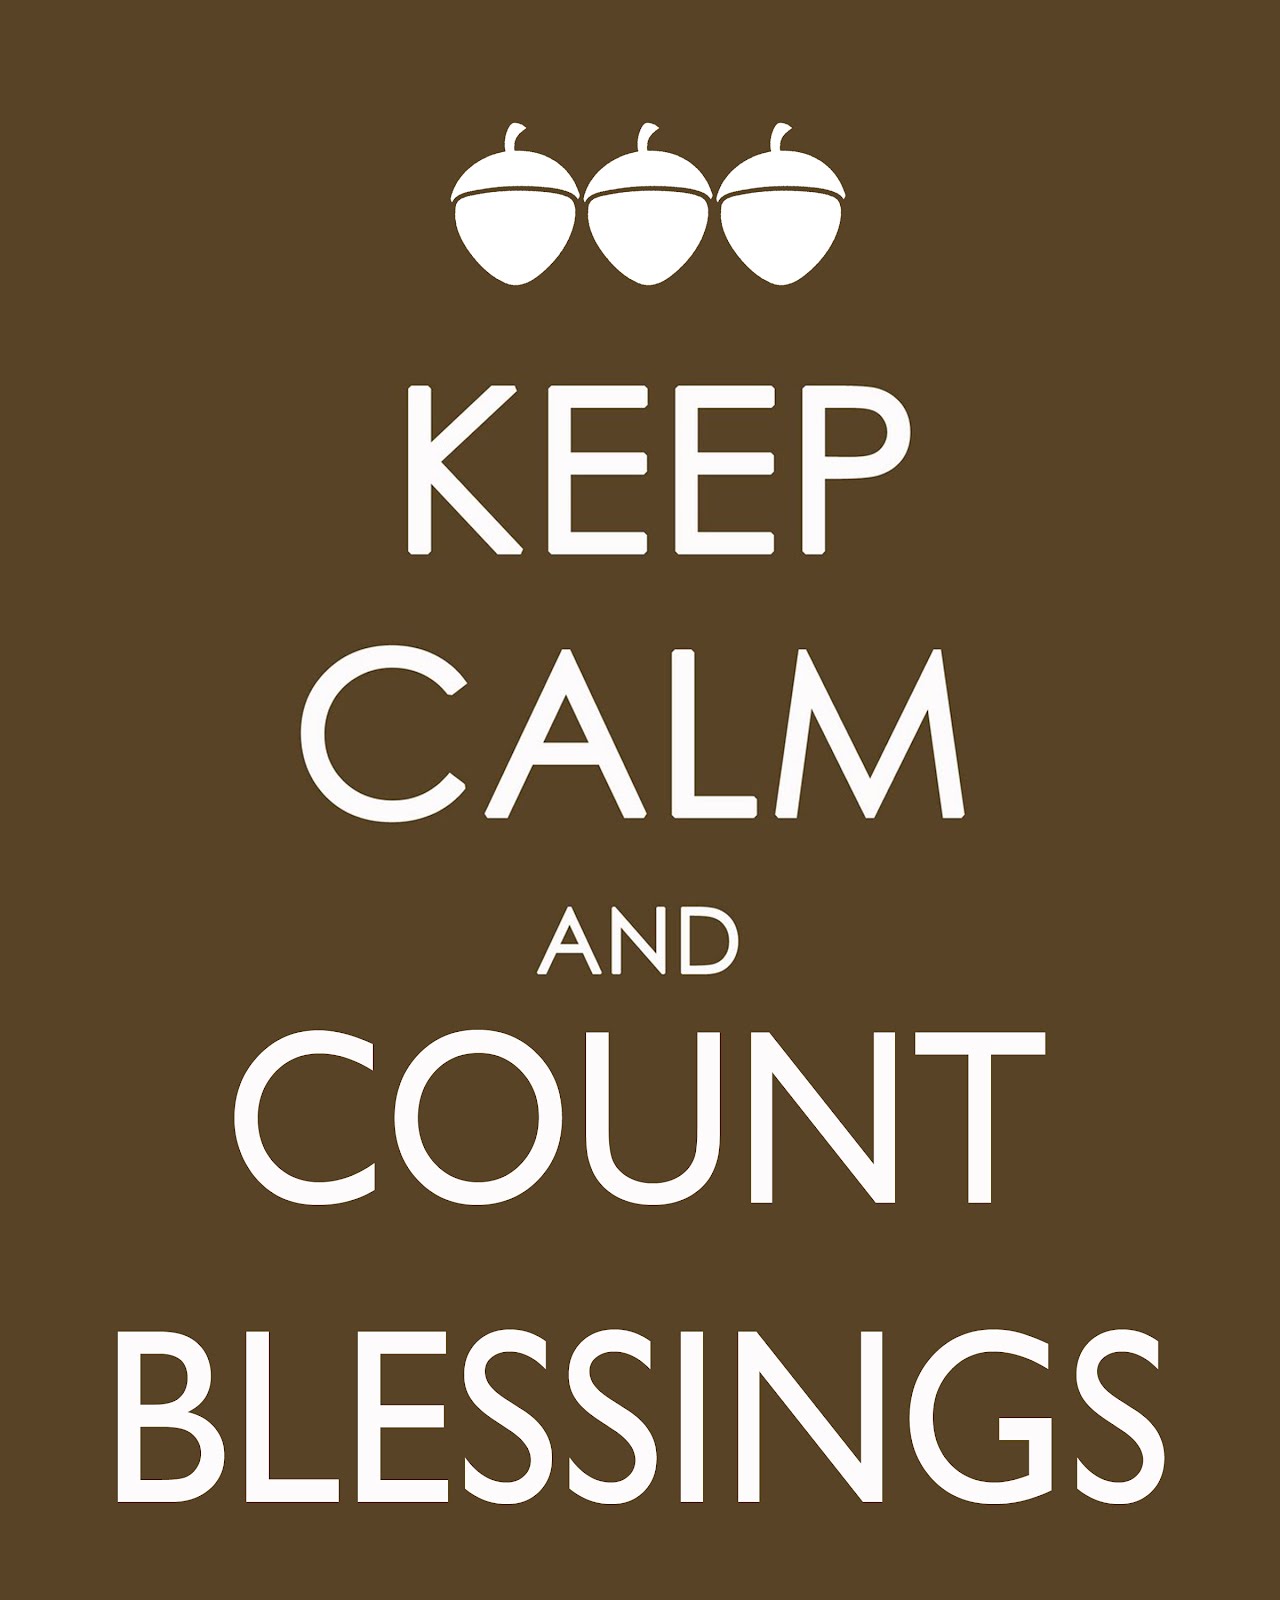 Keep фразы. Фразы с keep. Quotes about keep Calm. Count my Blessings таблички. Count your Blessings not your problems.